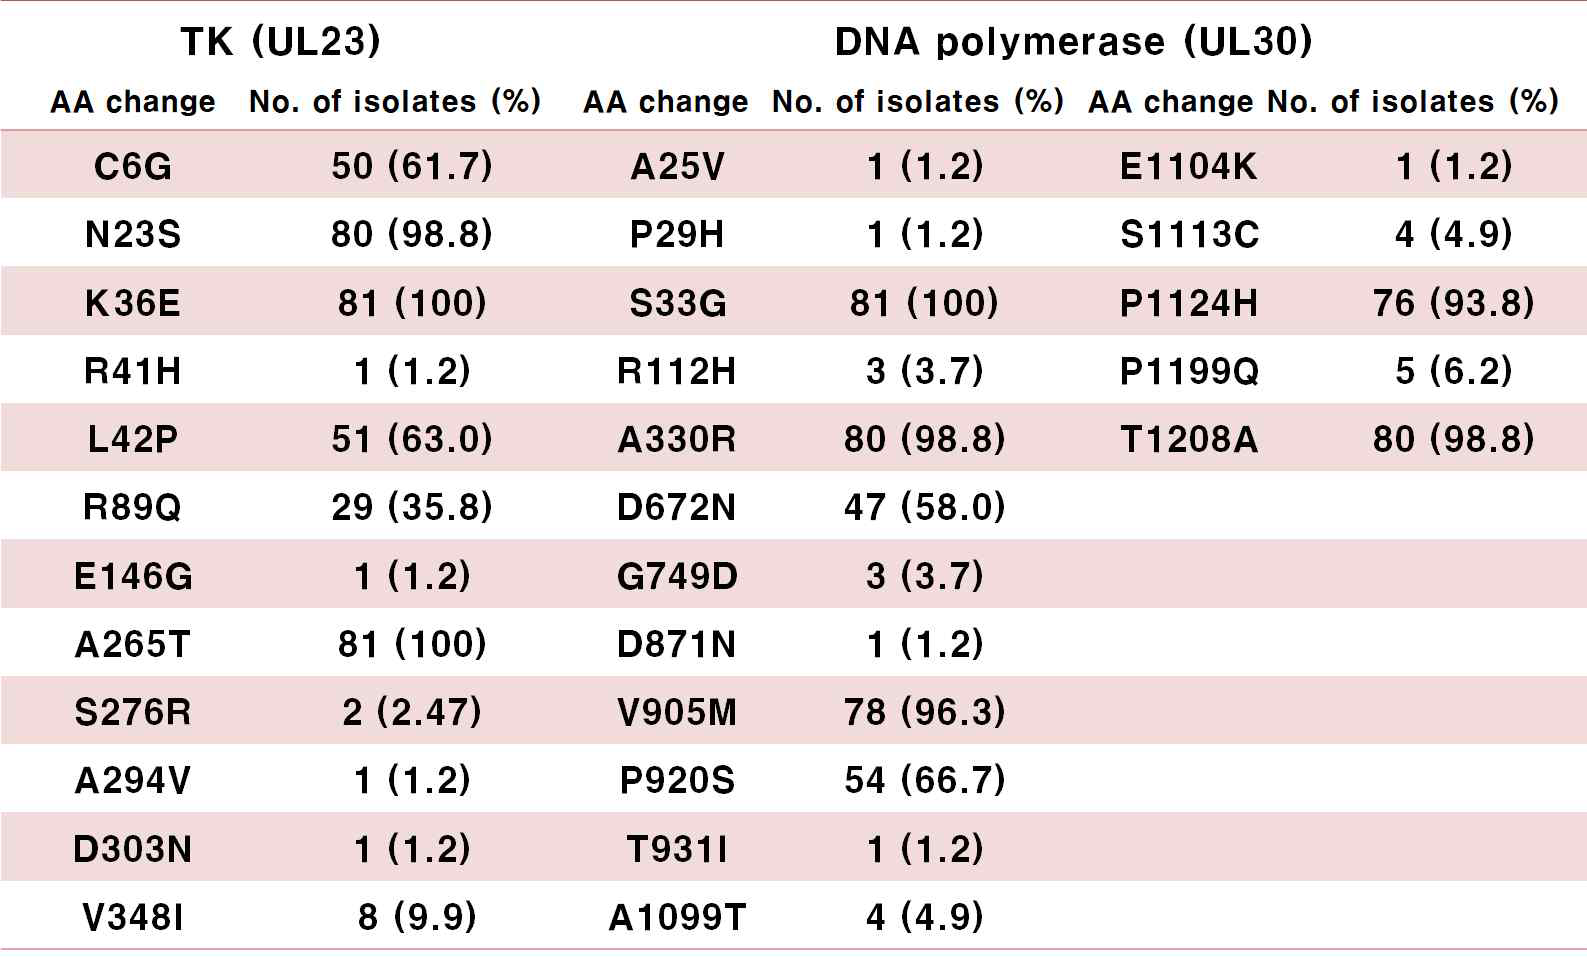 Natural polymorphisms within TK and DNA polymerase genes identified 81 HSV-1 clinical isolates